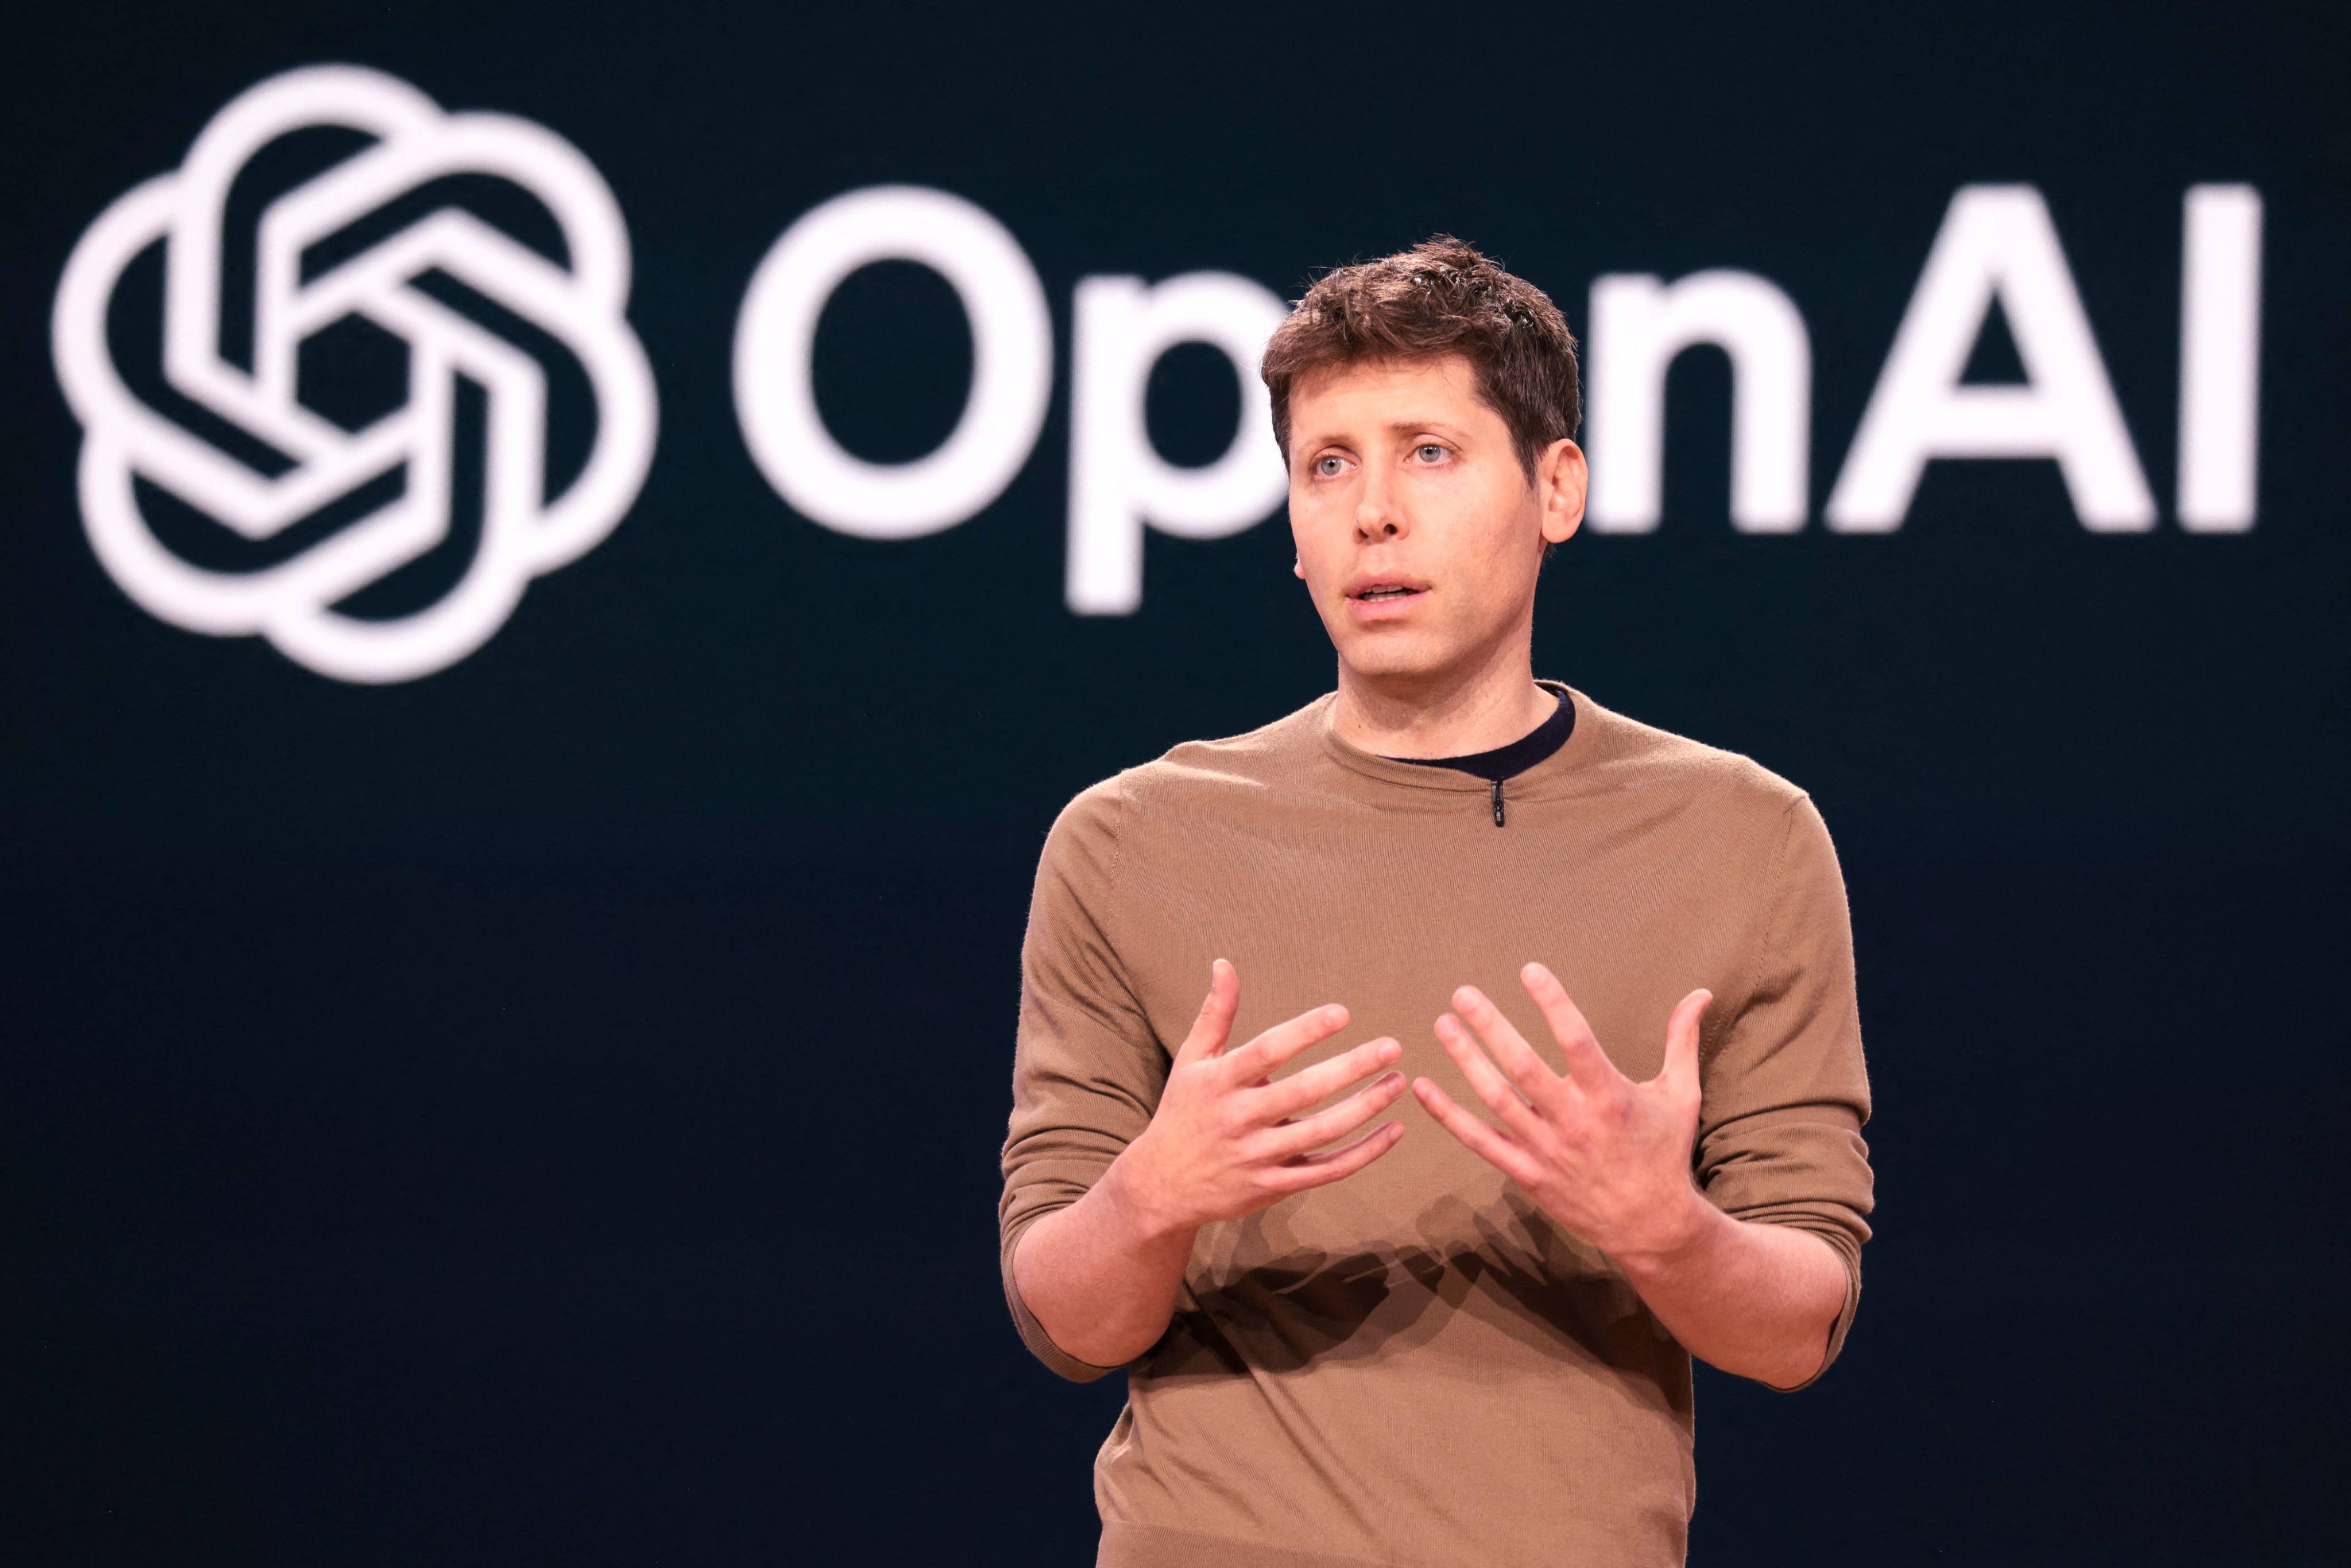 OpenAI CEO Sam Altman speaks during the Microsoft Build conference in Redmond, Washington on May 21. Altman and OpenAI have come under criticism for creating a synthetic voice that sounds remarkably like actress Scarlett Johansson without her permission. Photo: AFP